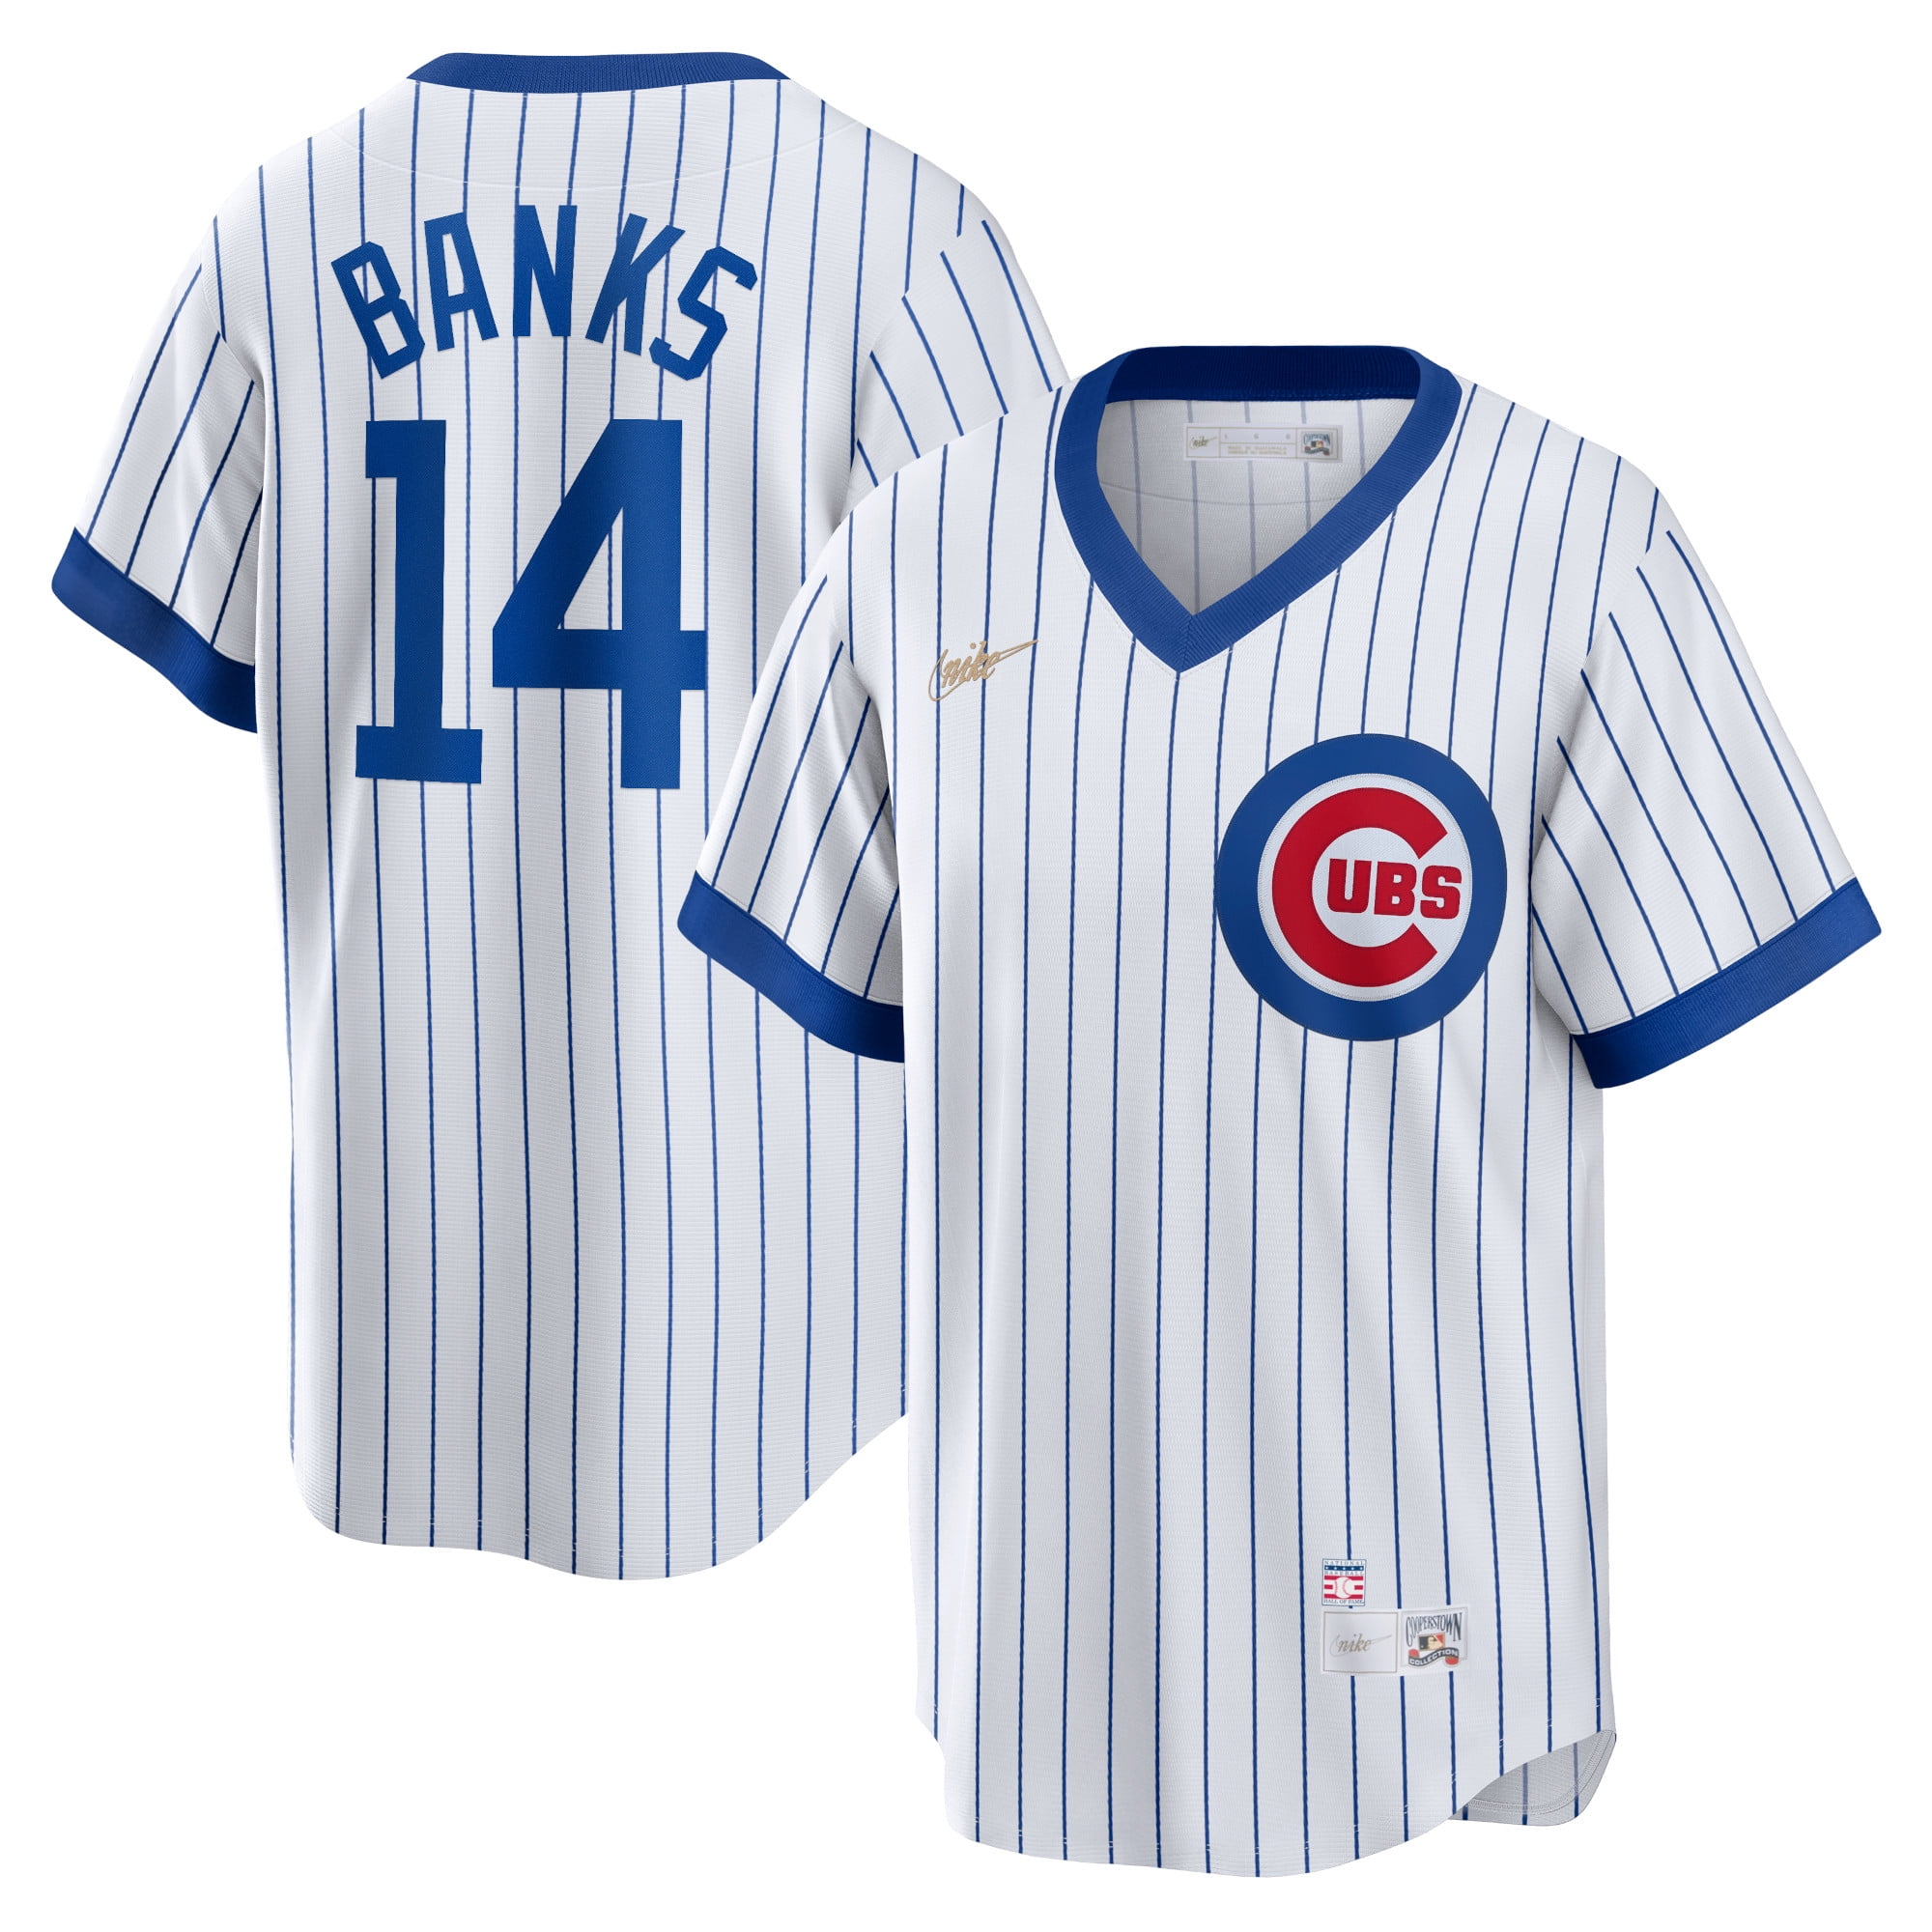 ernie banks today